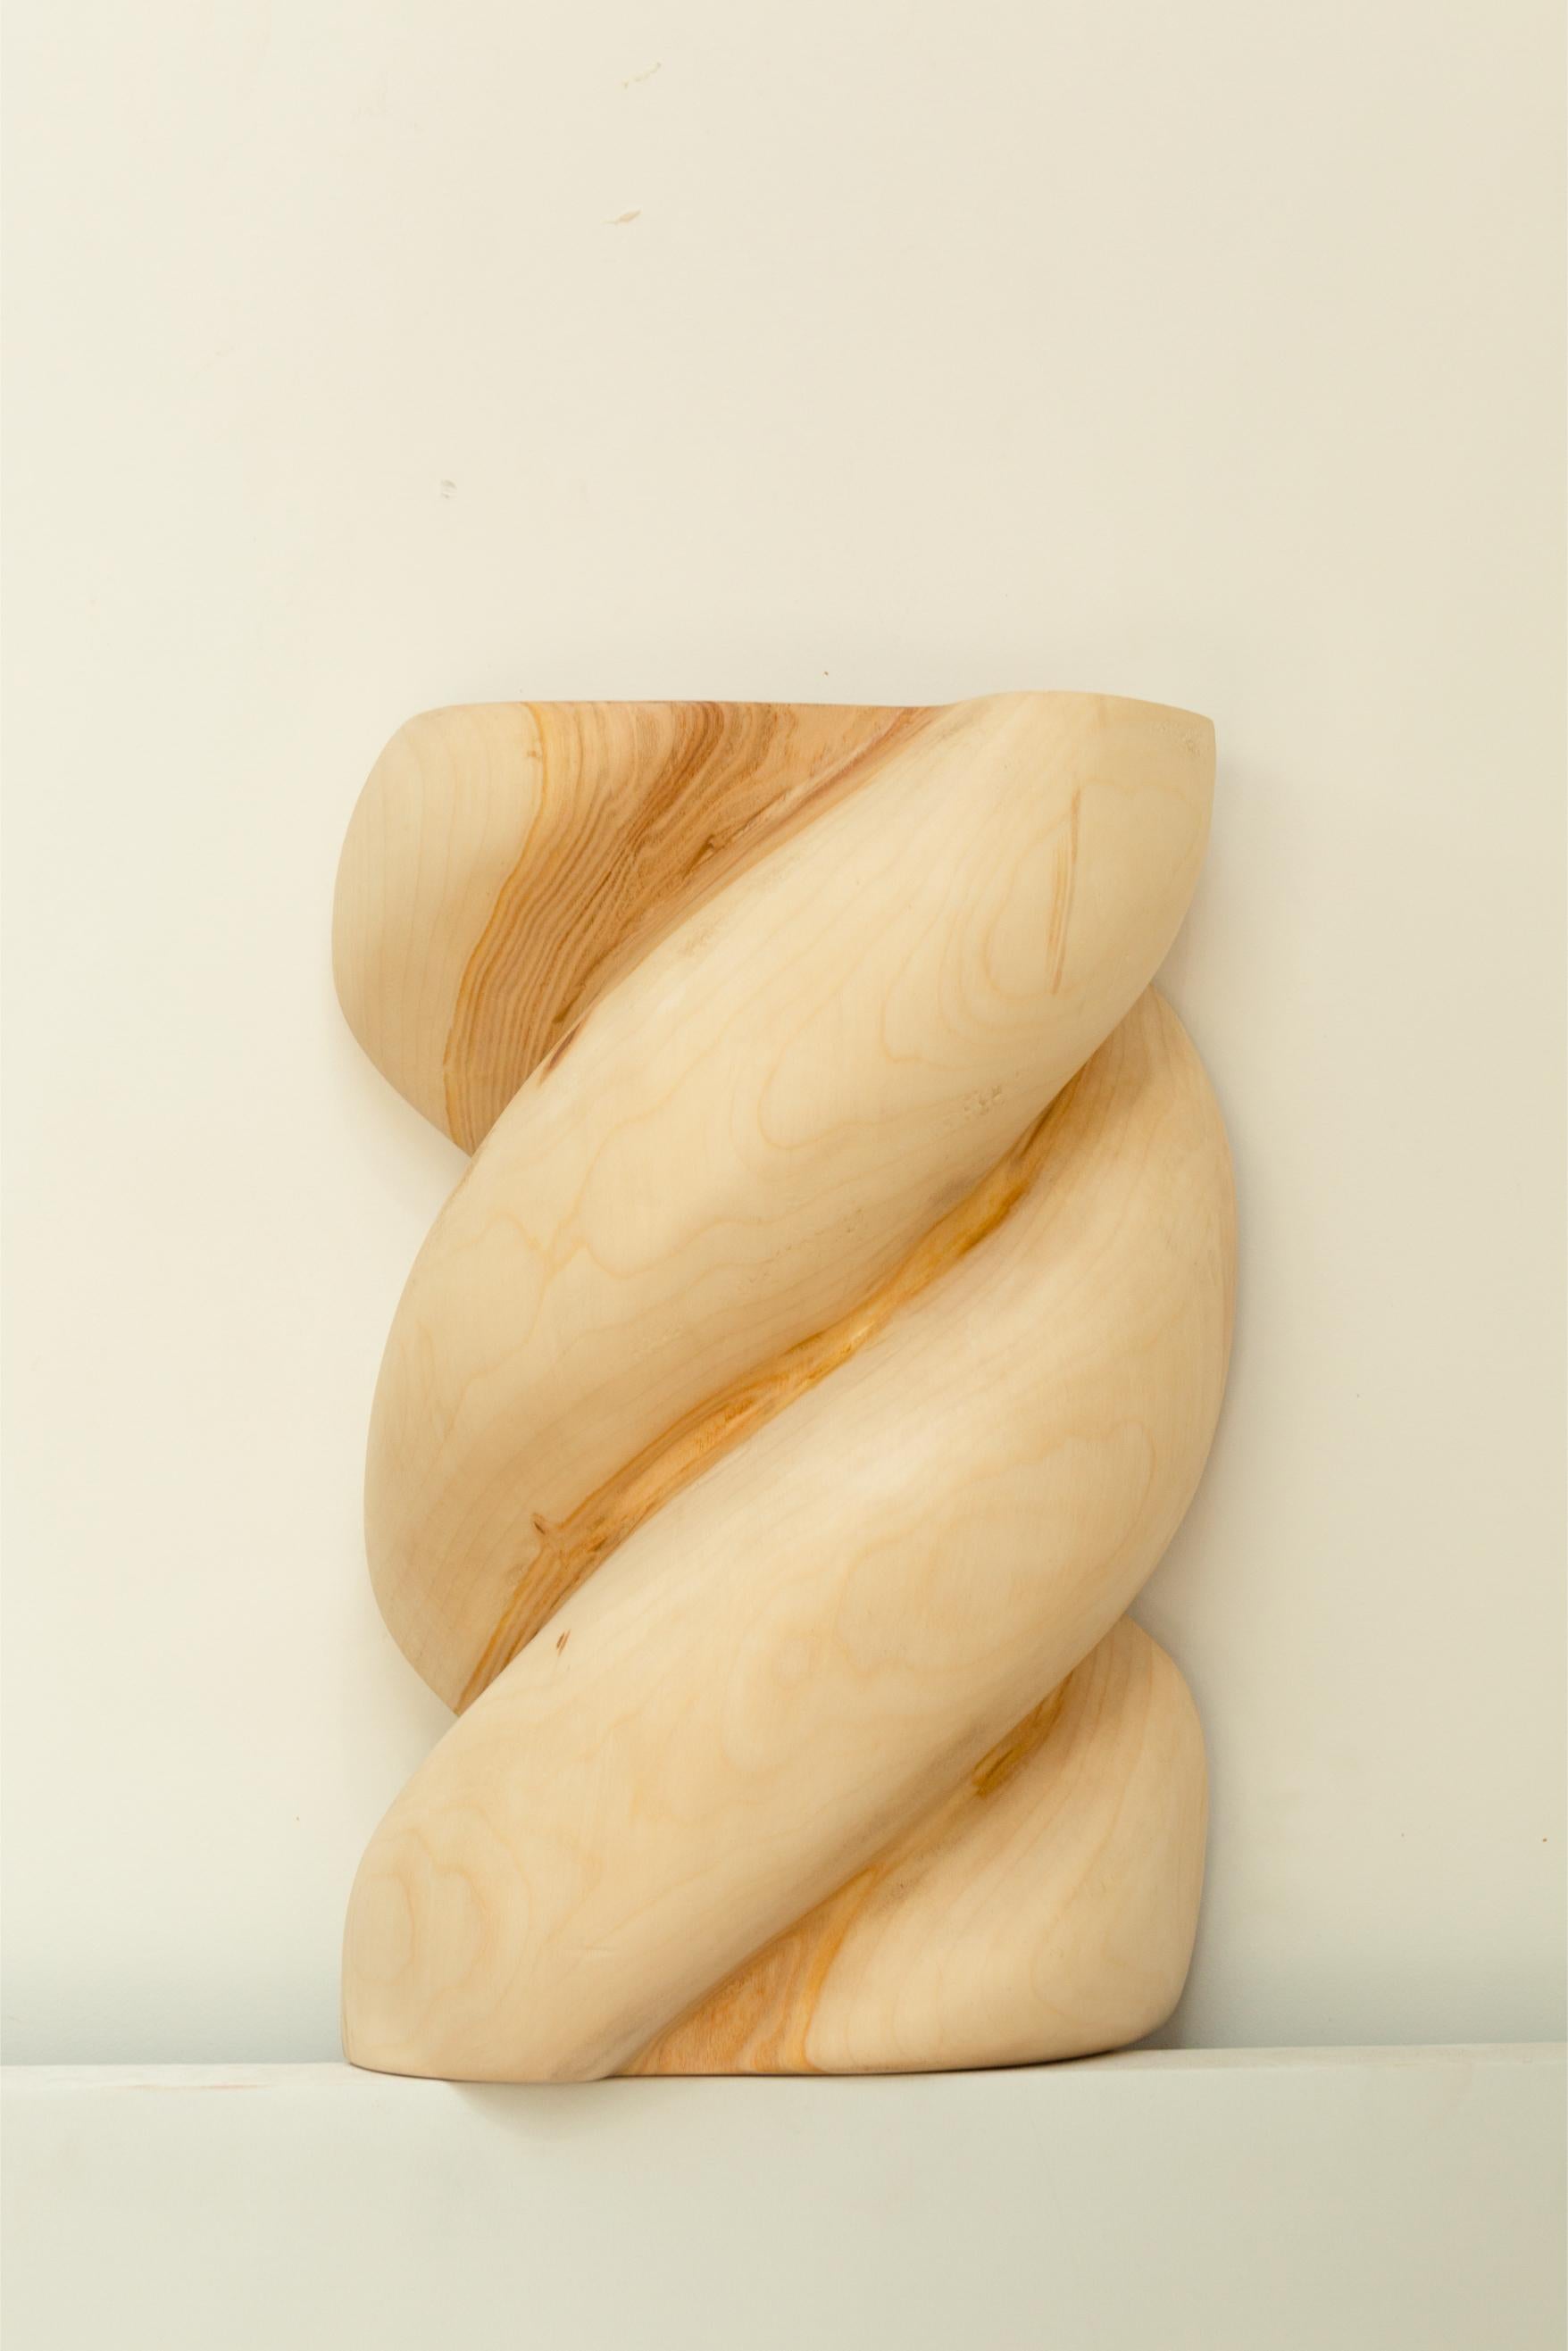 Giant Wood Babka Sconce by Di Fretto
Dimensions: W 25 x D 16 x H 44 cm
Materials: Oak

The Babka wall light is made to order by hand in white poplar. The veins and colors depend on each piece of wood, so each Babka sculpture will be significantly